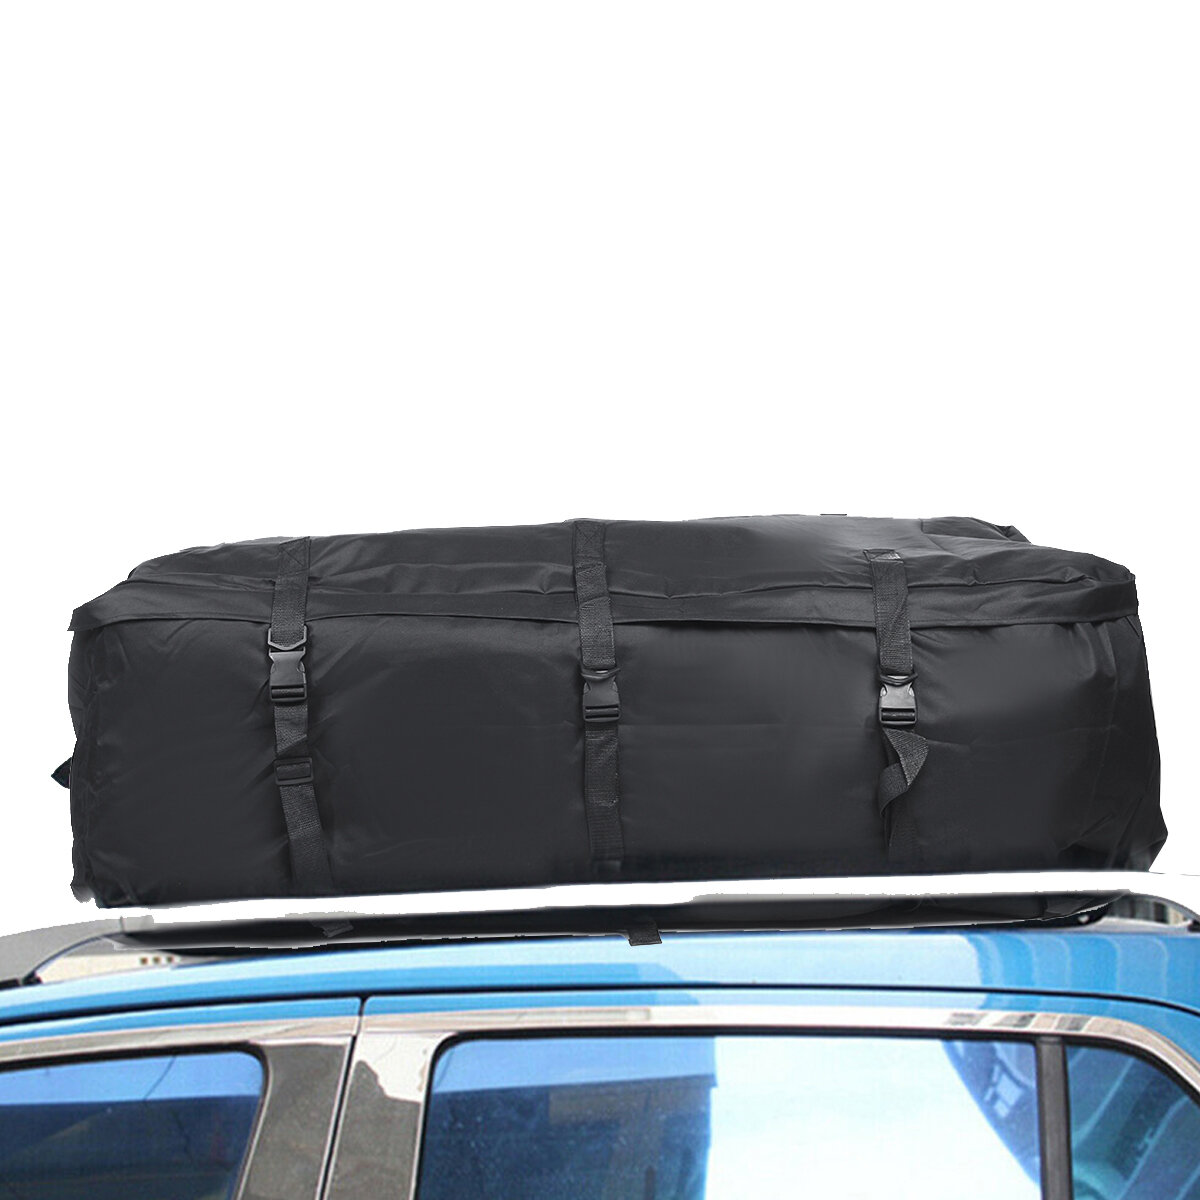 

53inch Portable Storage Bag Waterproof Car SUV Roof Top Rack Bag Oxford Travel Luggage Storage Cargo Carrier Large